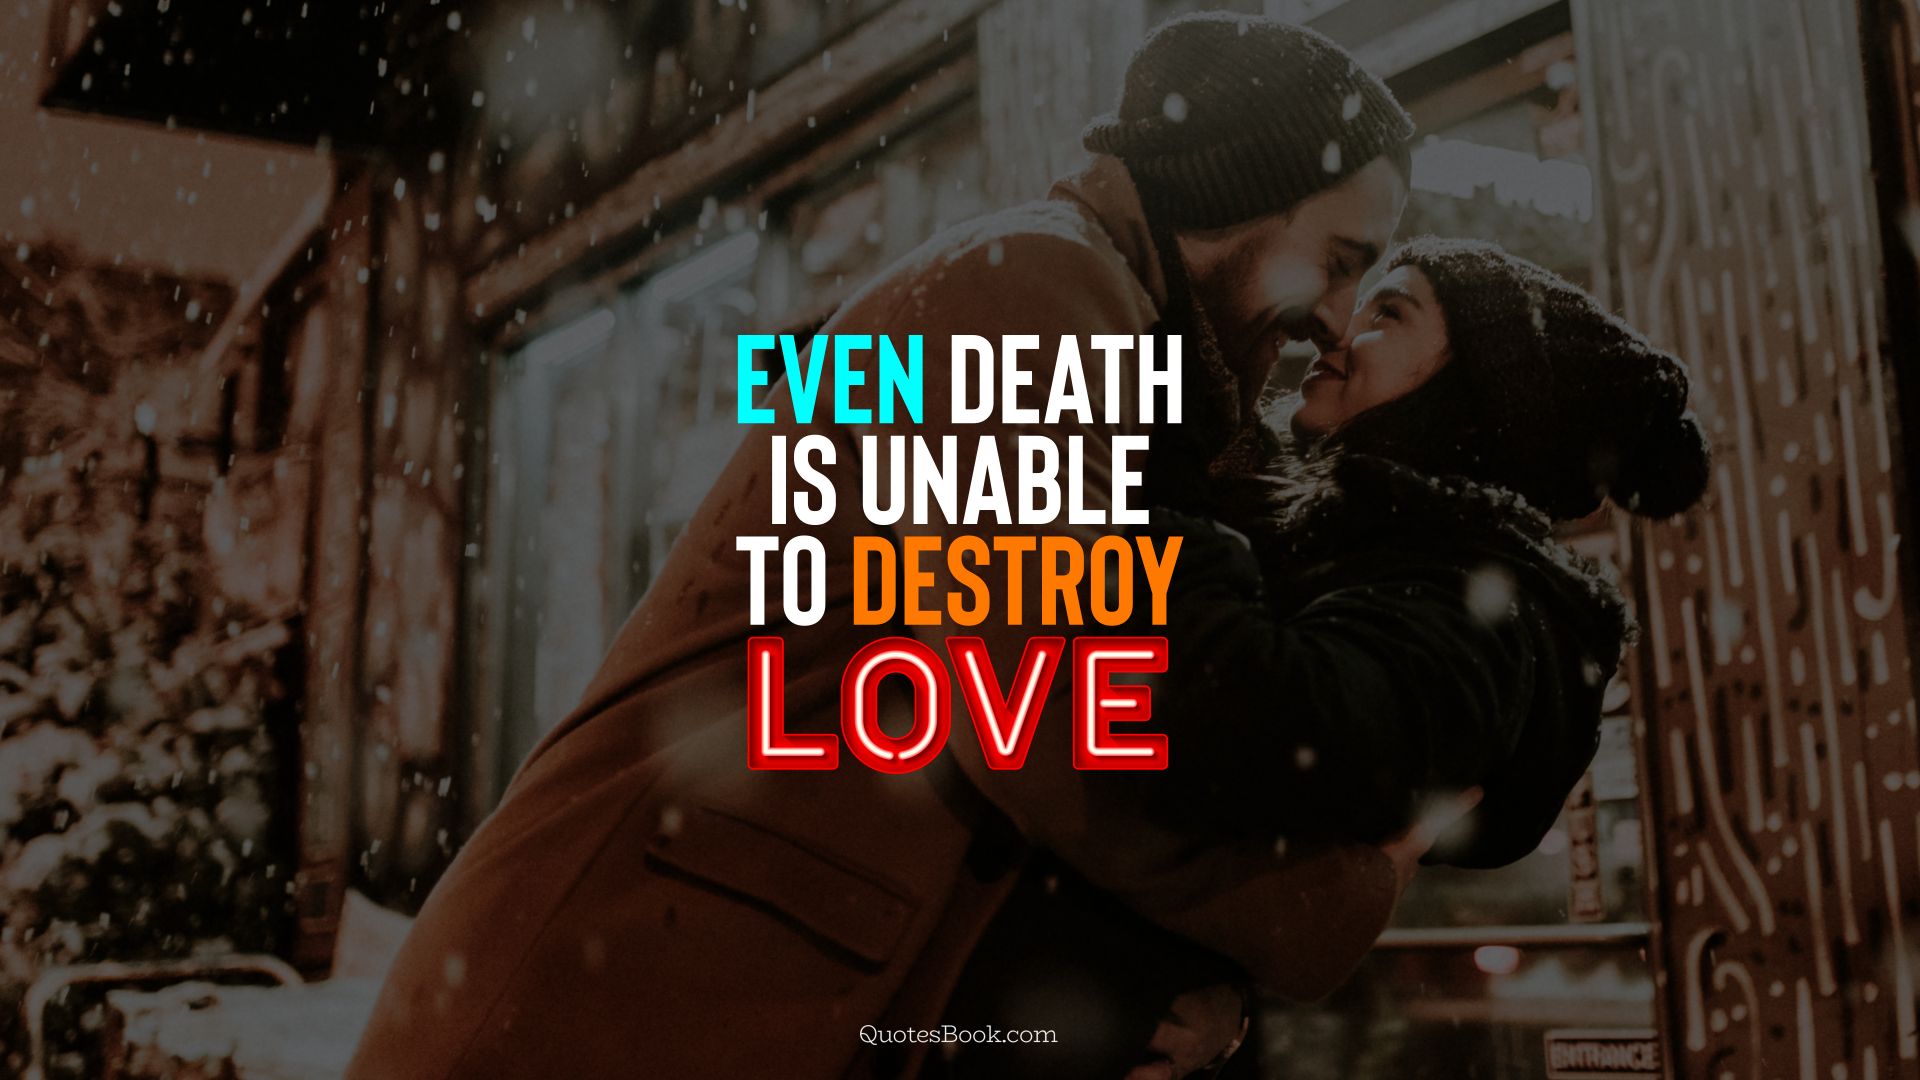 Even death is unable to destroy love. - Quote by QuotesBook